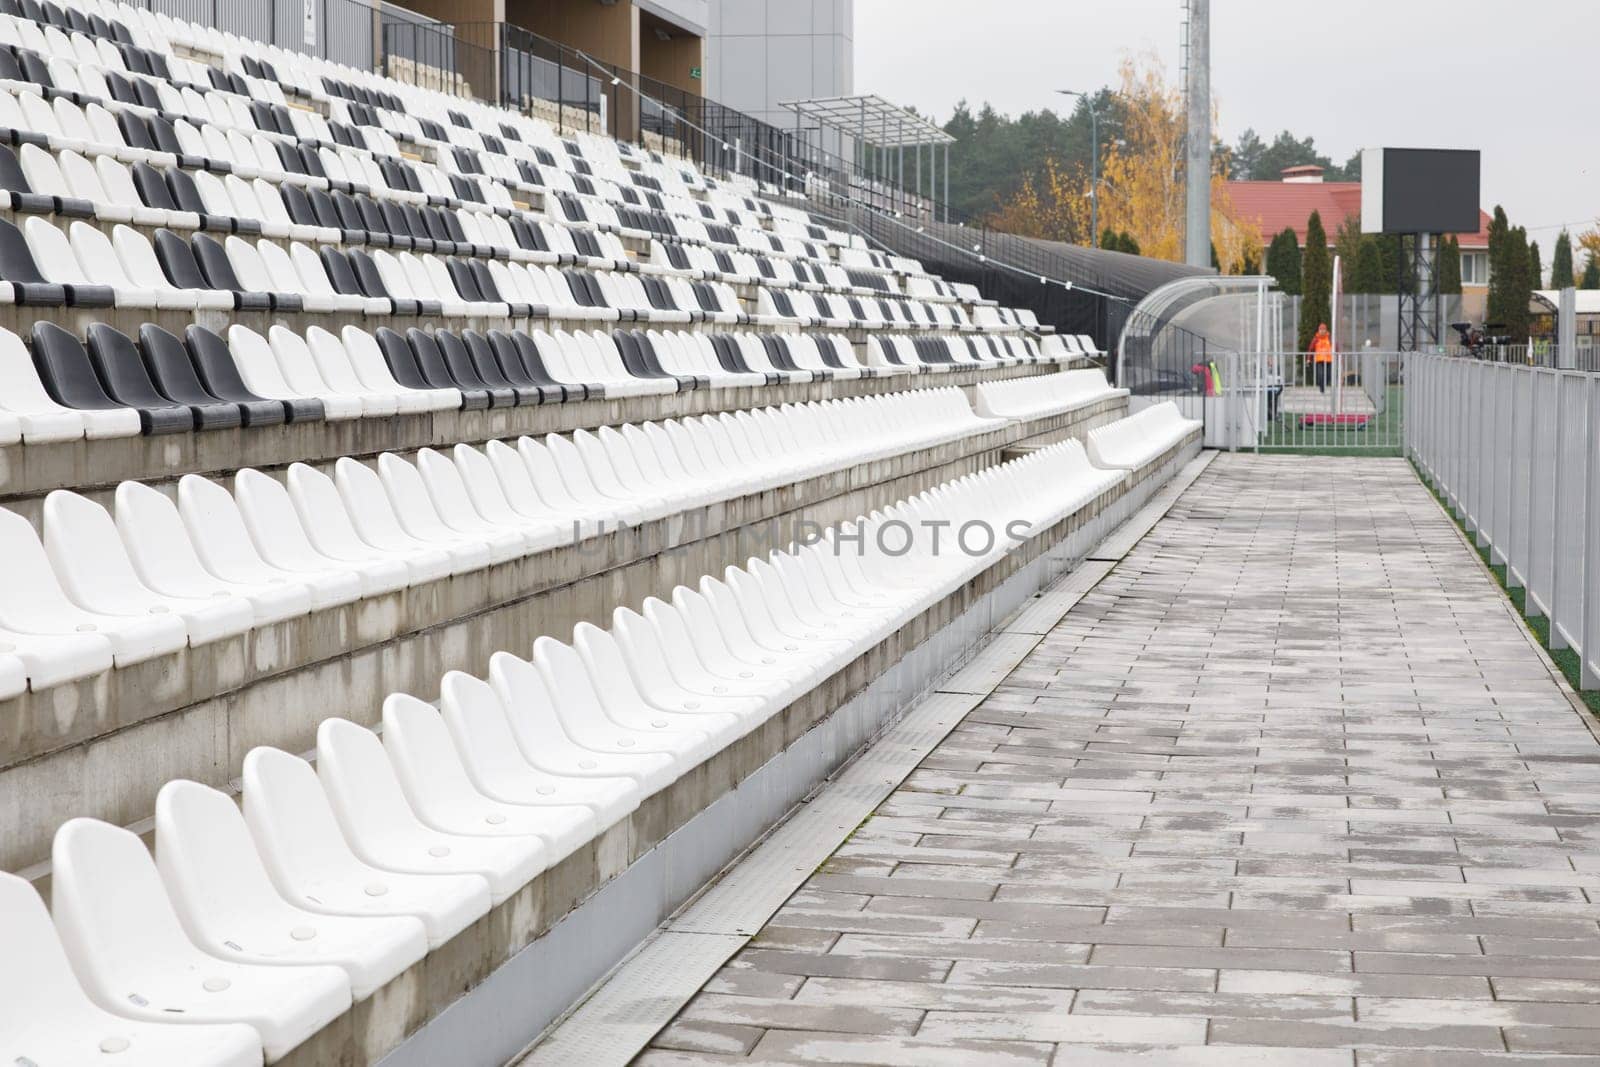 football tribune black and white chairs. High quality photo